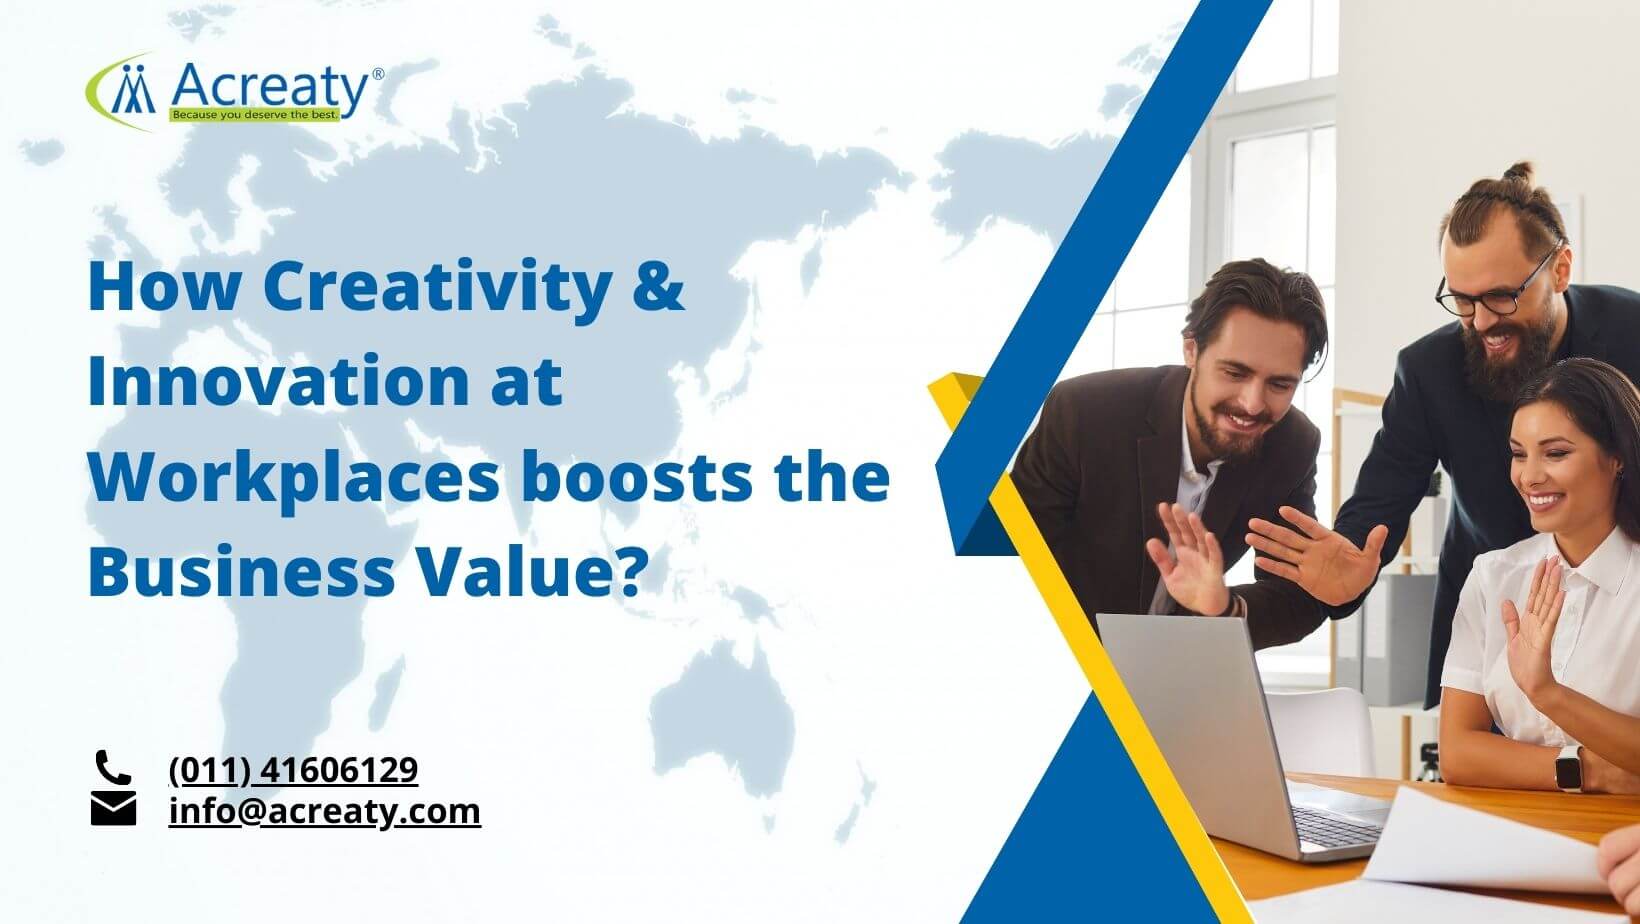 How Creativity & Innovation at Workplaces boosts the Business Value?